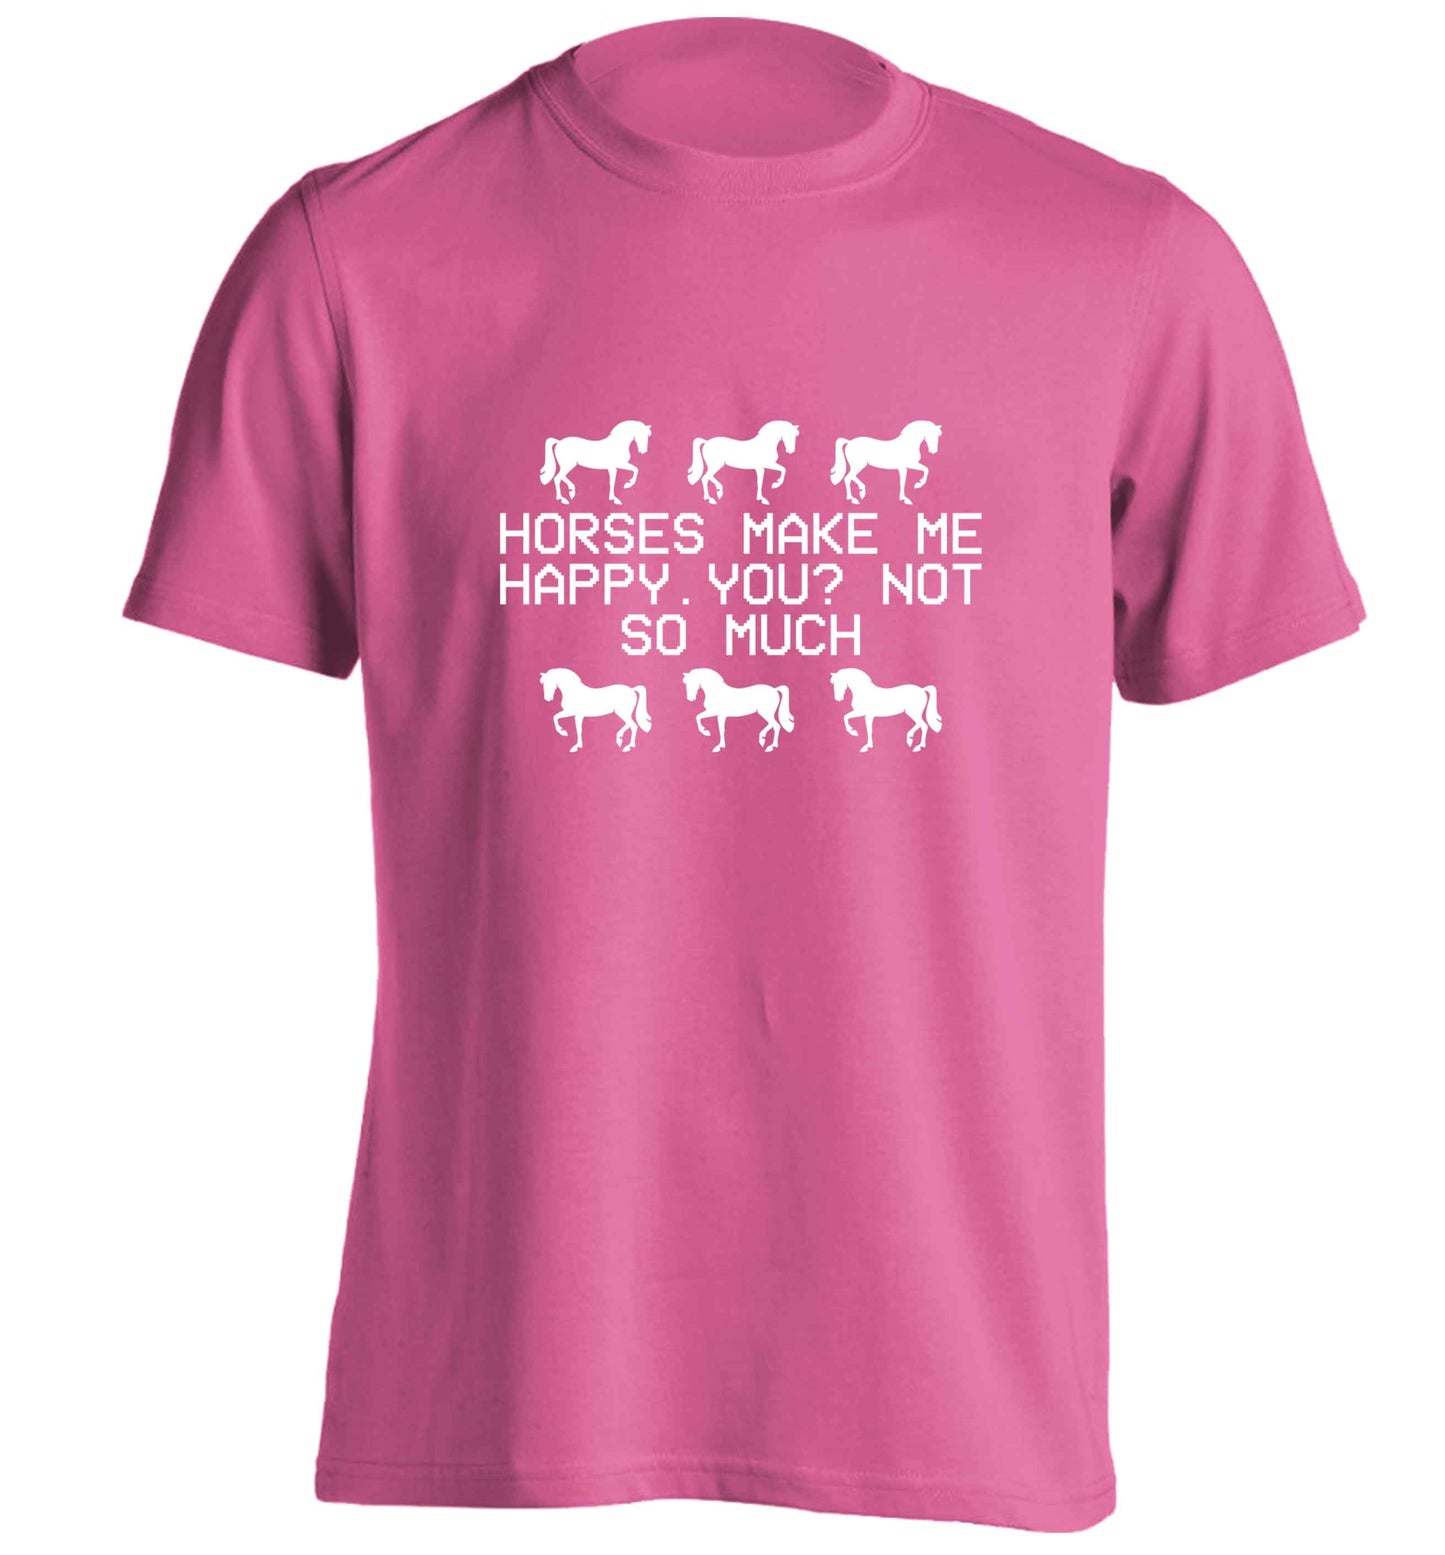 Horses make me happy, you not so much adults unisex pink Tshirt 2XL